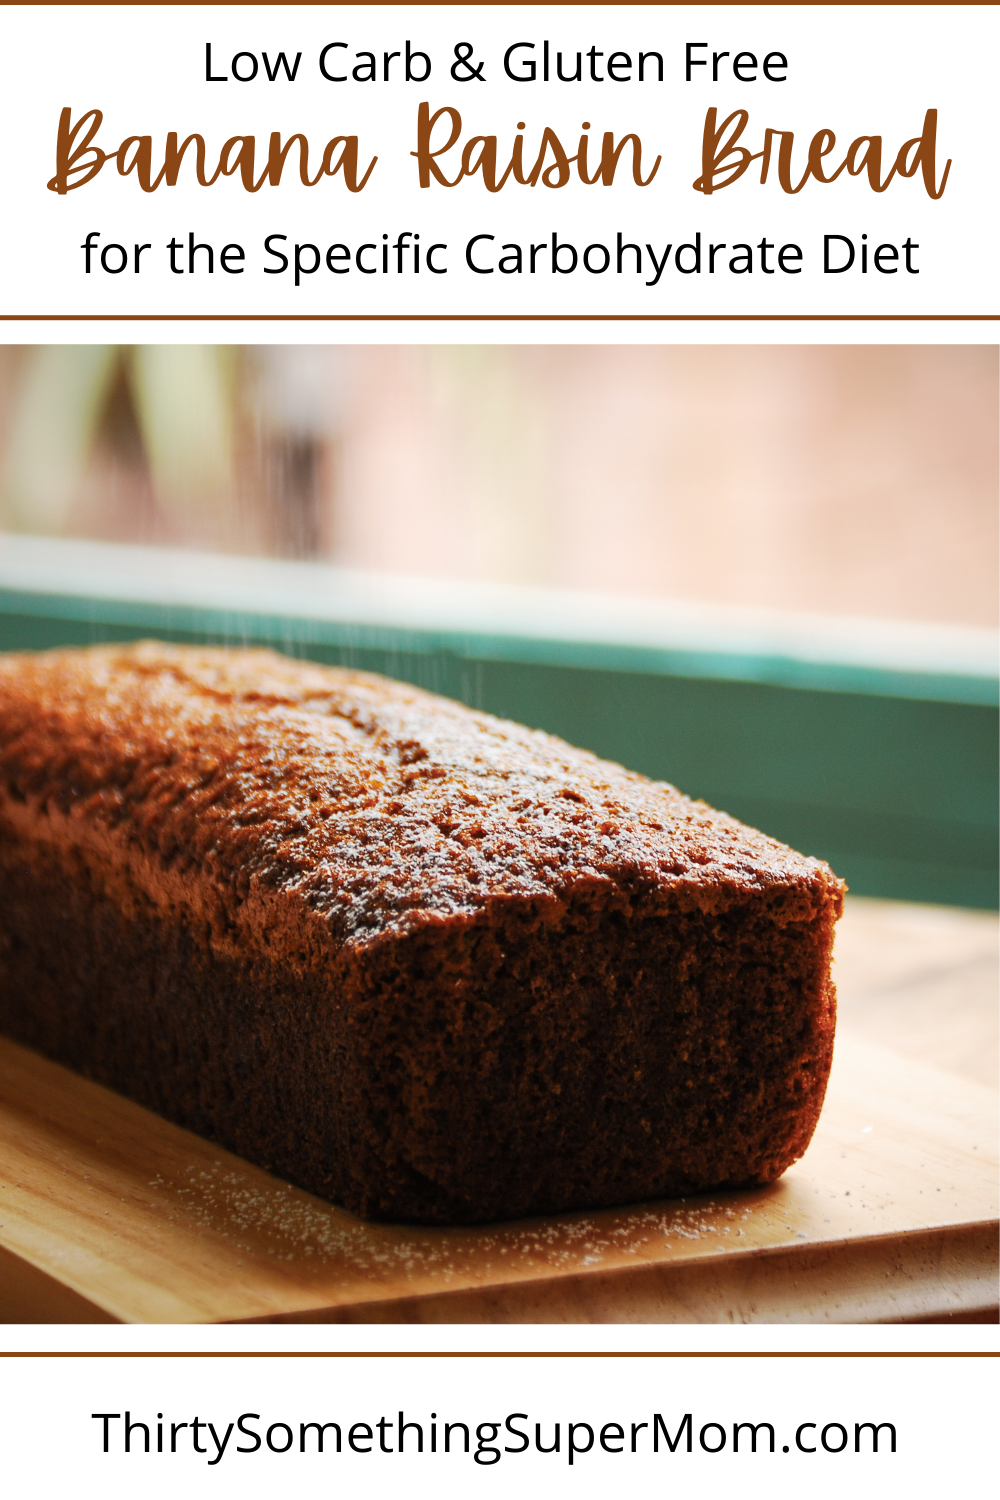 Banana Raisin Bread for the Specific Carbohydrate Diet